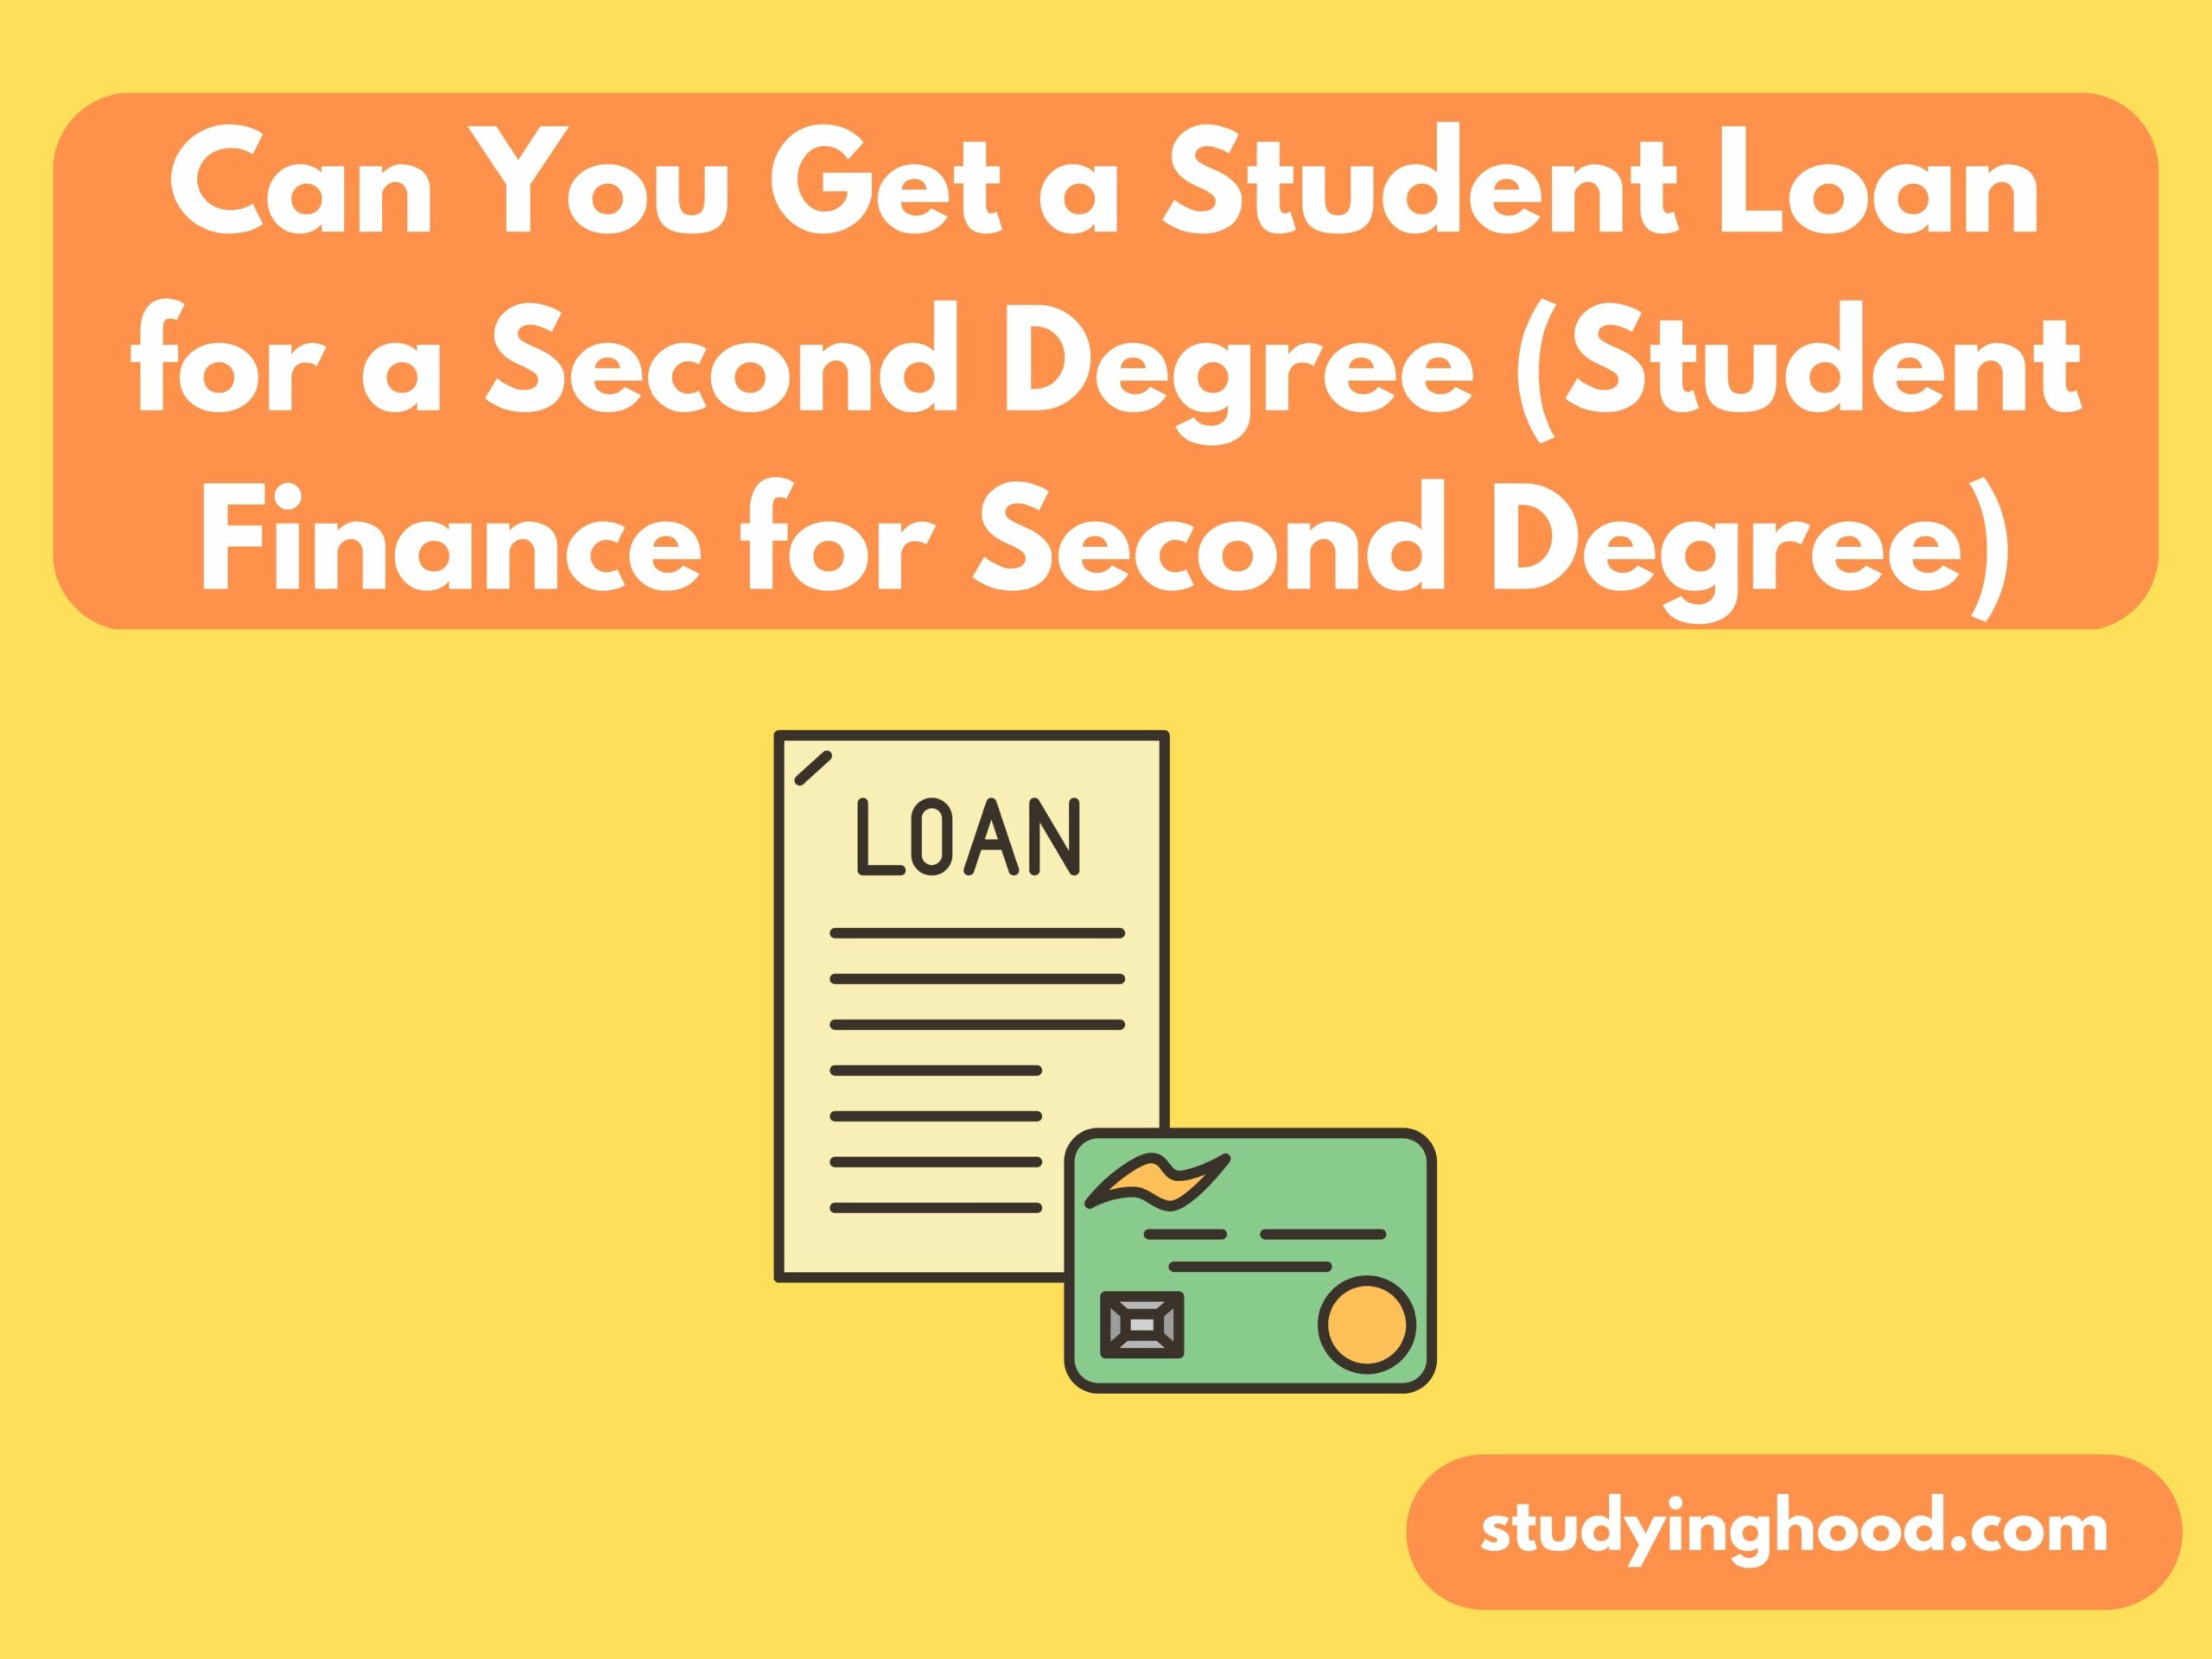 Can You Get a Student Loan for a Second Degree (Student Finance for Second Degree)